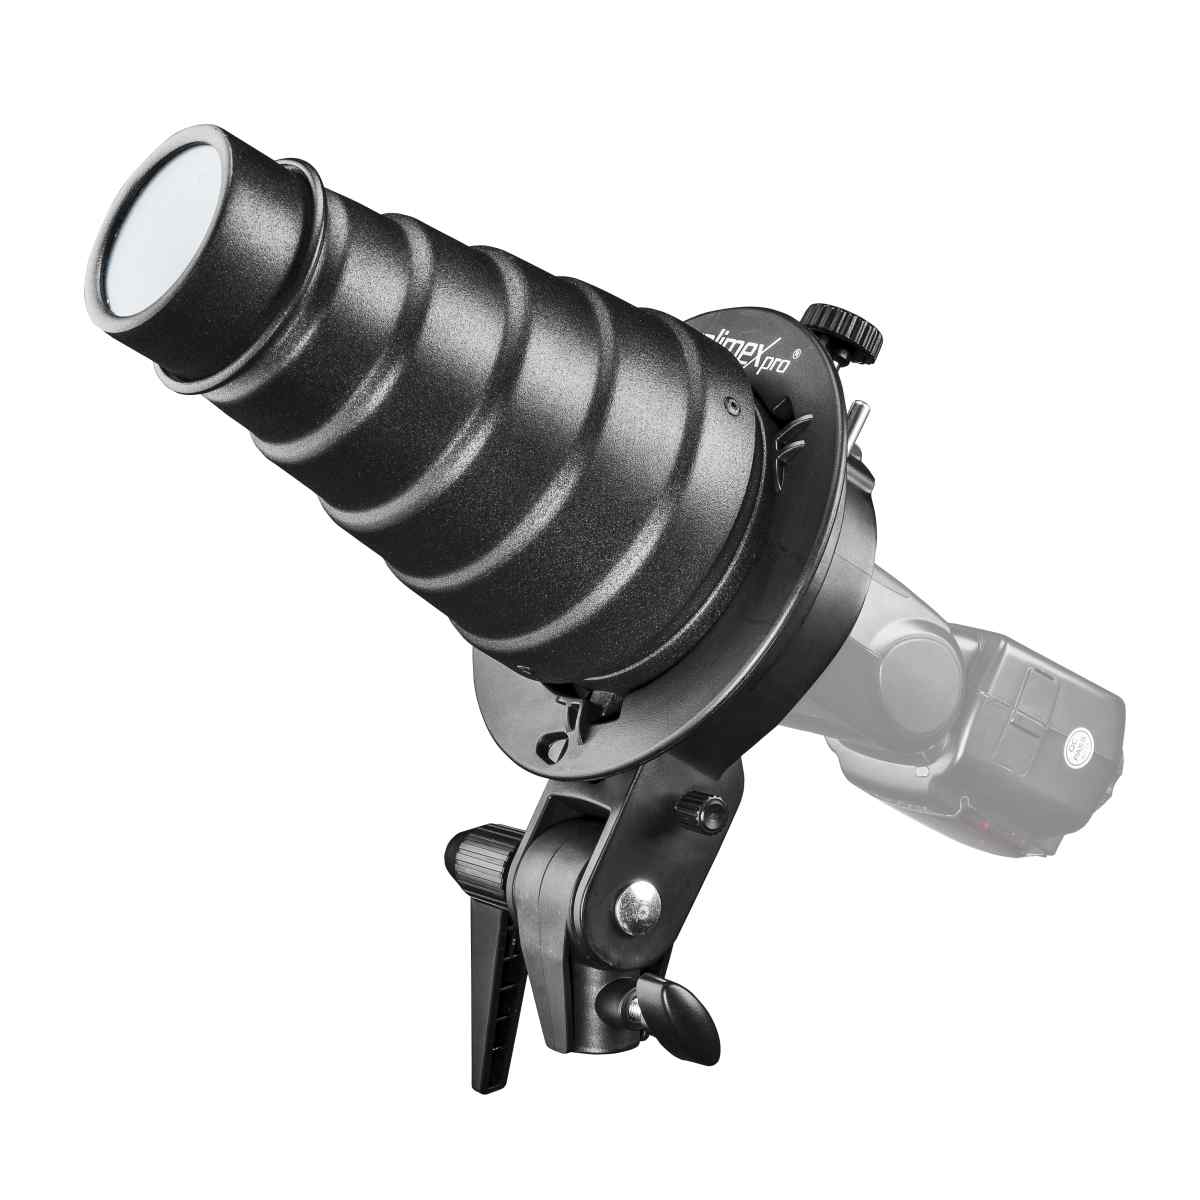 Walimex Spot Mounting for Compact Flashes